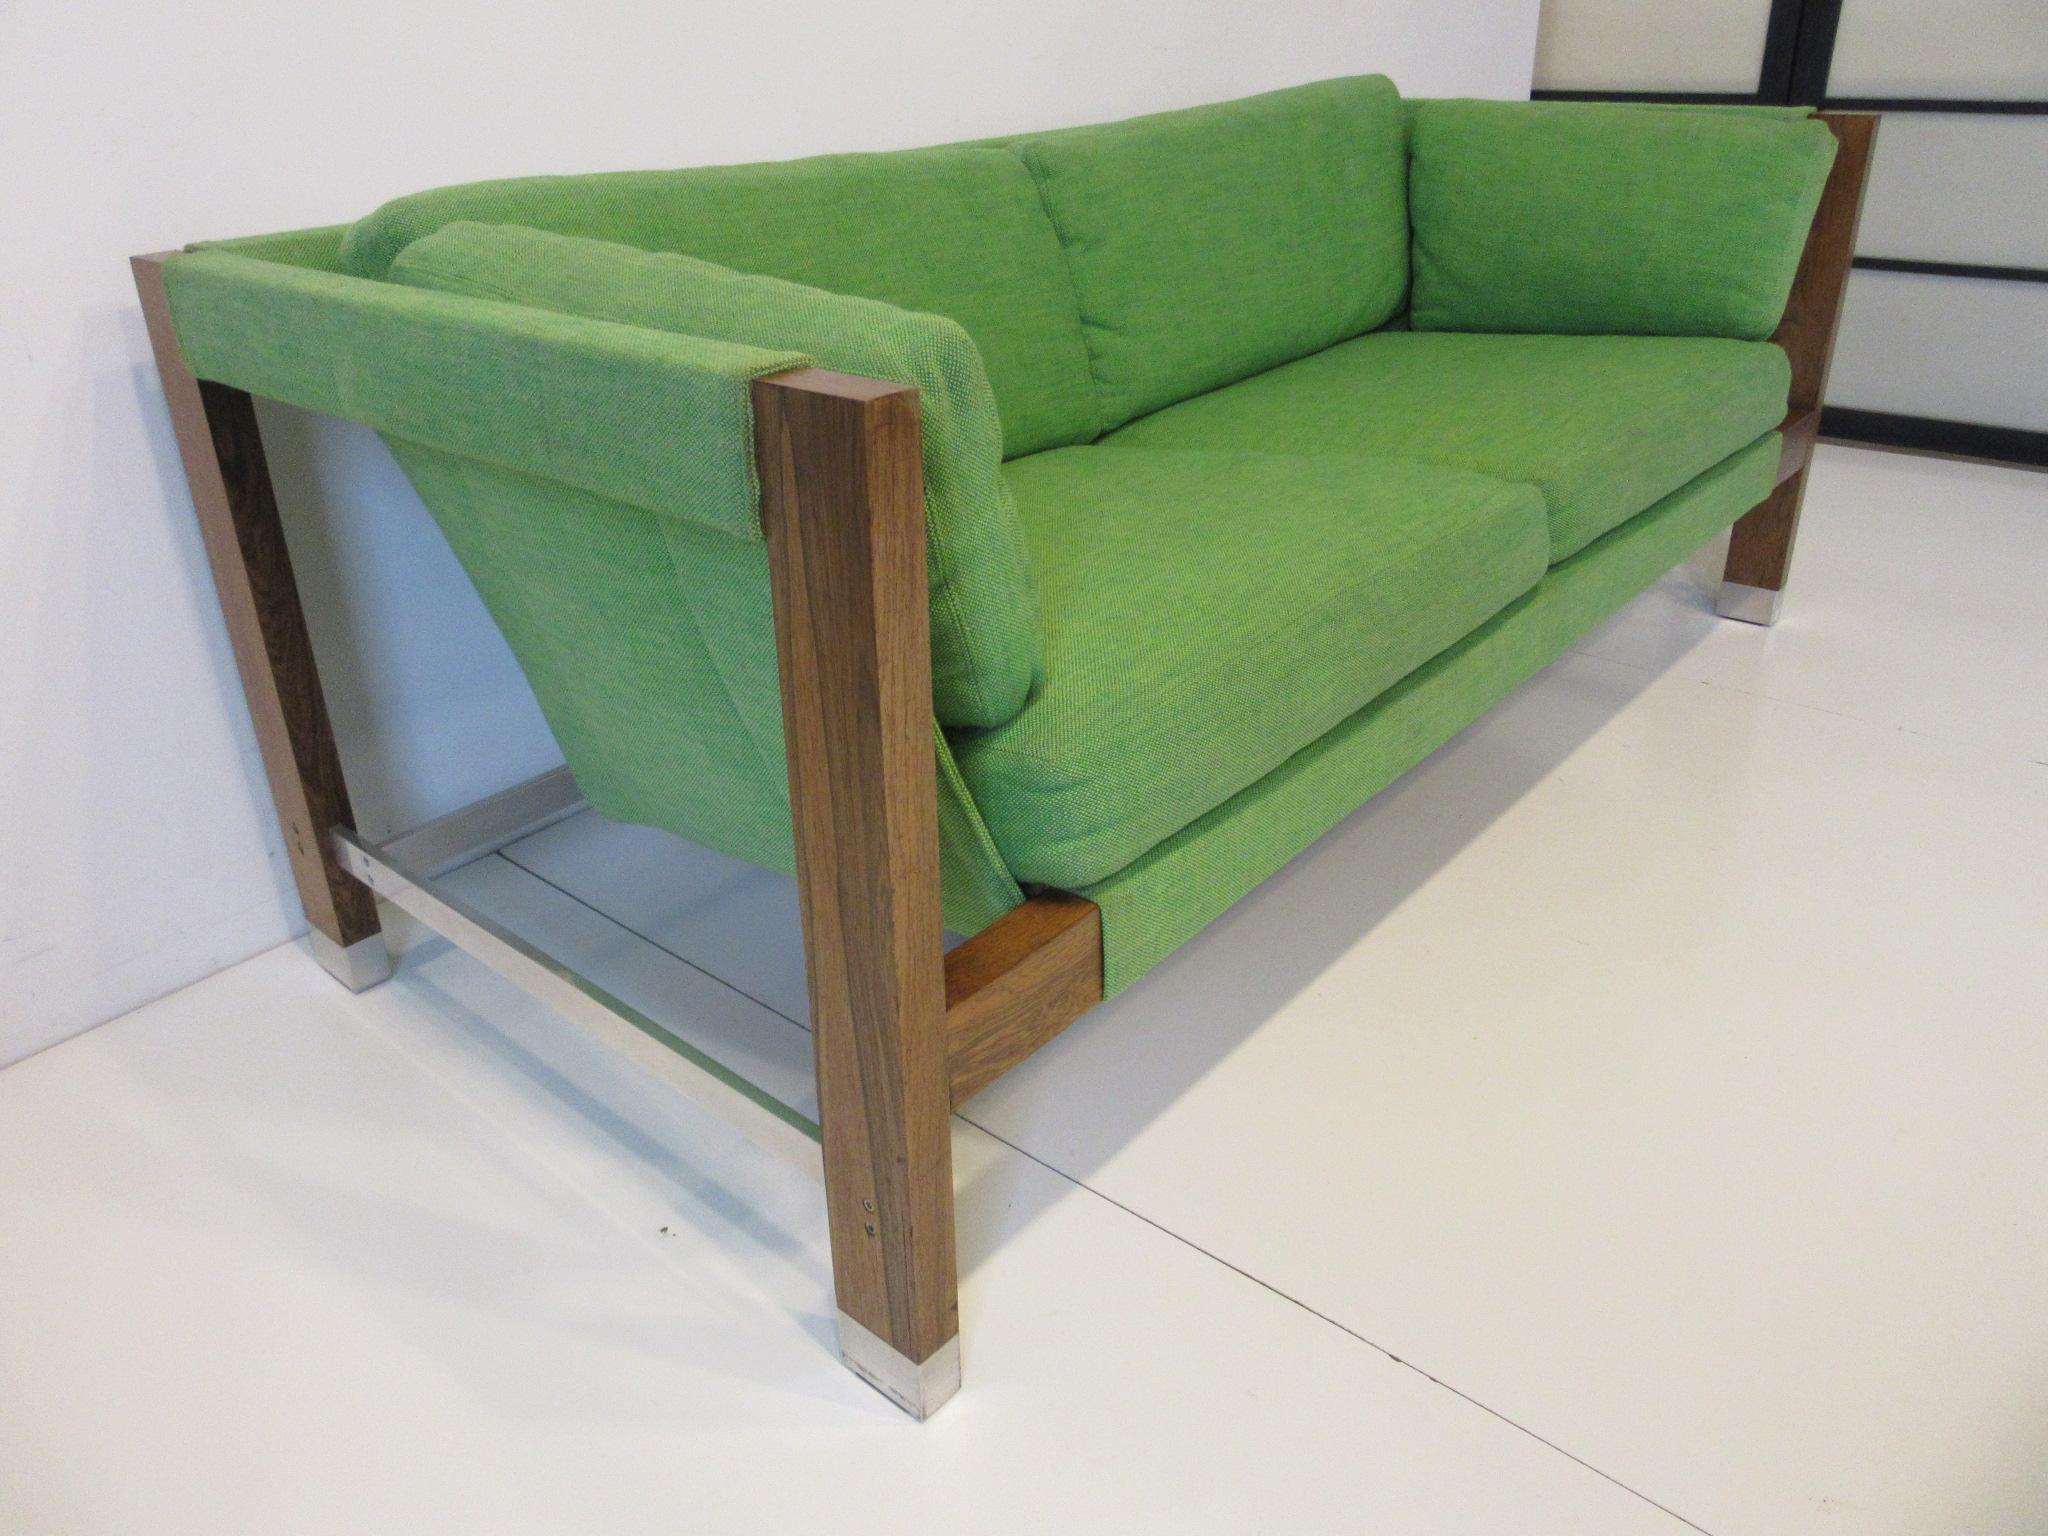 A upholstered sling styled sofa in apple green woven contract fabric with rosewood legs and aluminum tipped feet and stretchers. A well crafted piece from the 1970s designed by Jack Cartwright and retaining the label for the Founders Furniture